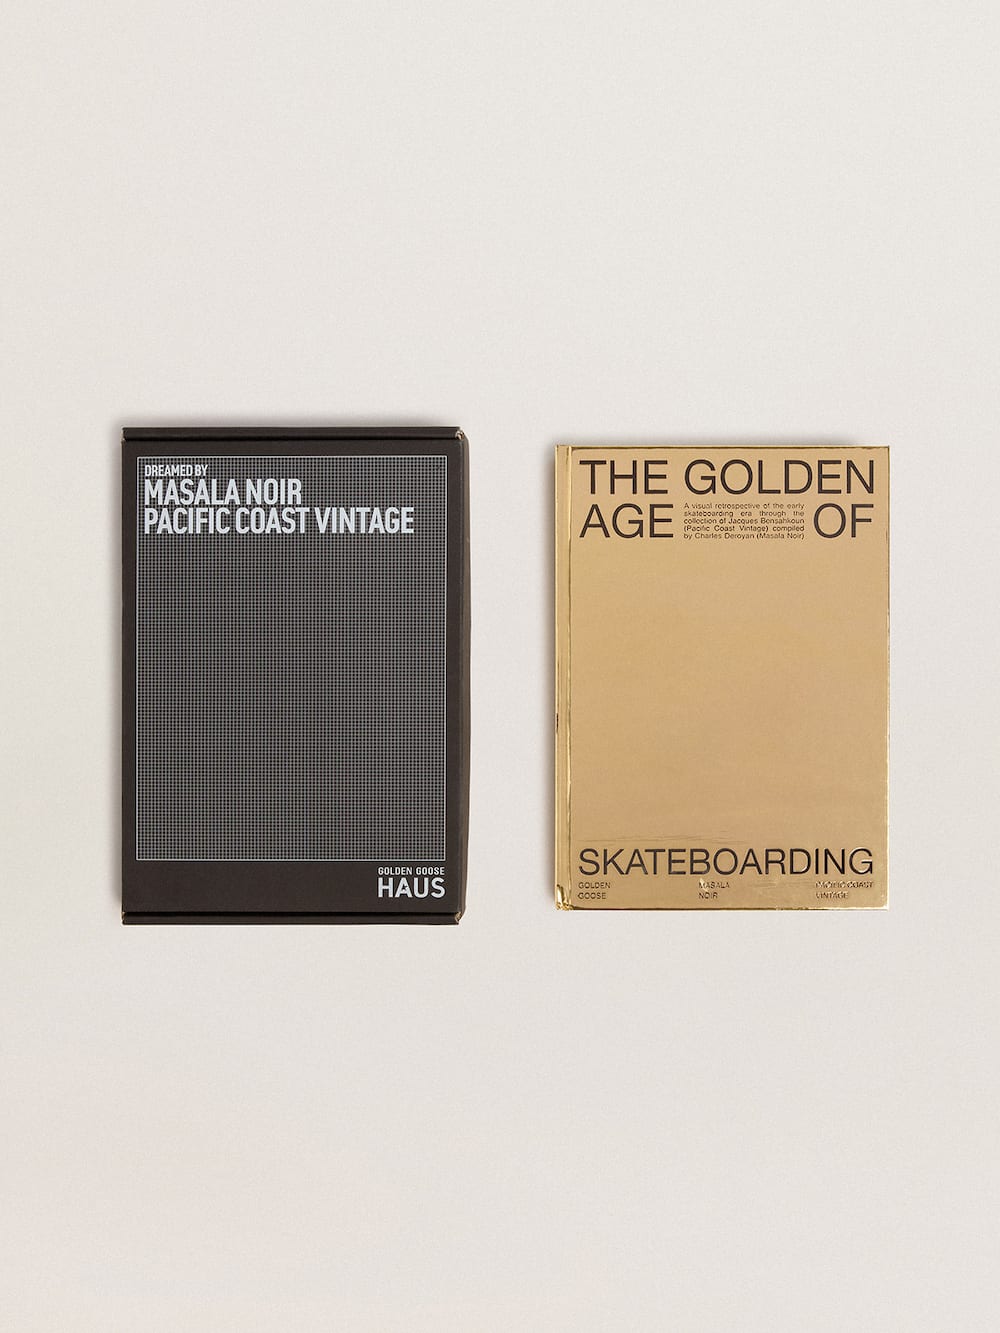 Golden Goose - “The Golden age of Skateboarding” Dreamed By Pacific Coast Vintage And Masala Noir HAUS of Dreamers exclusive in 